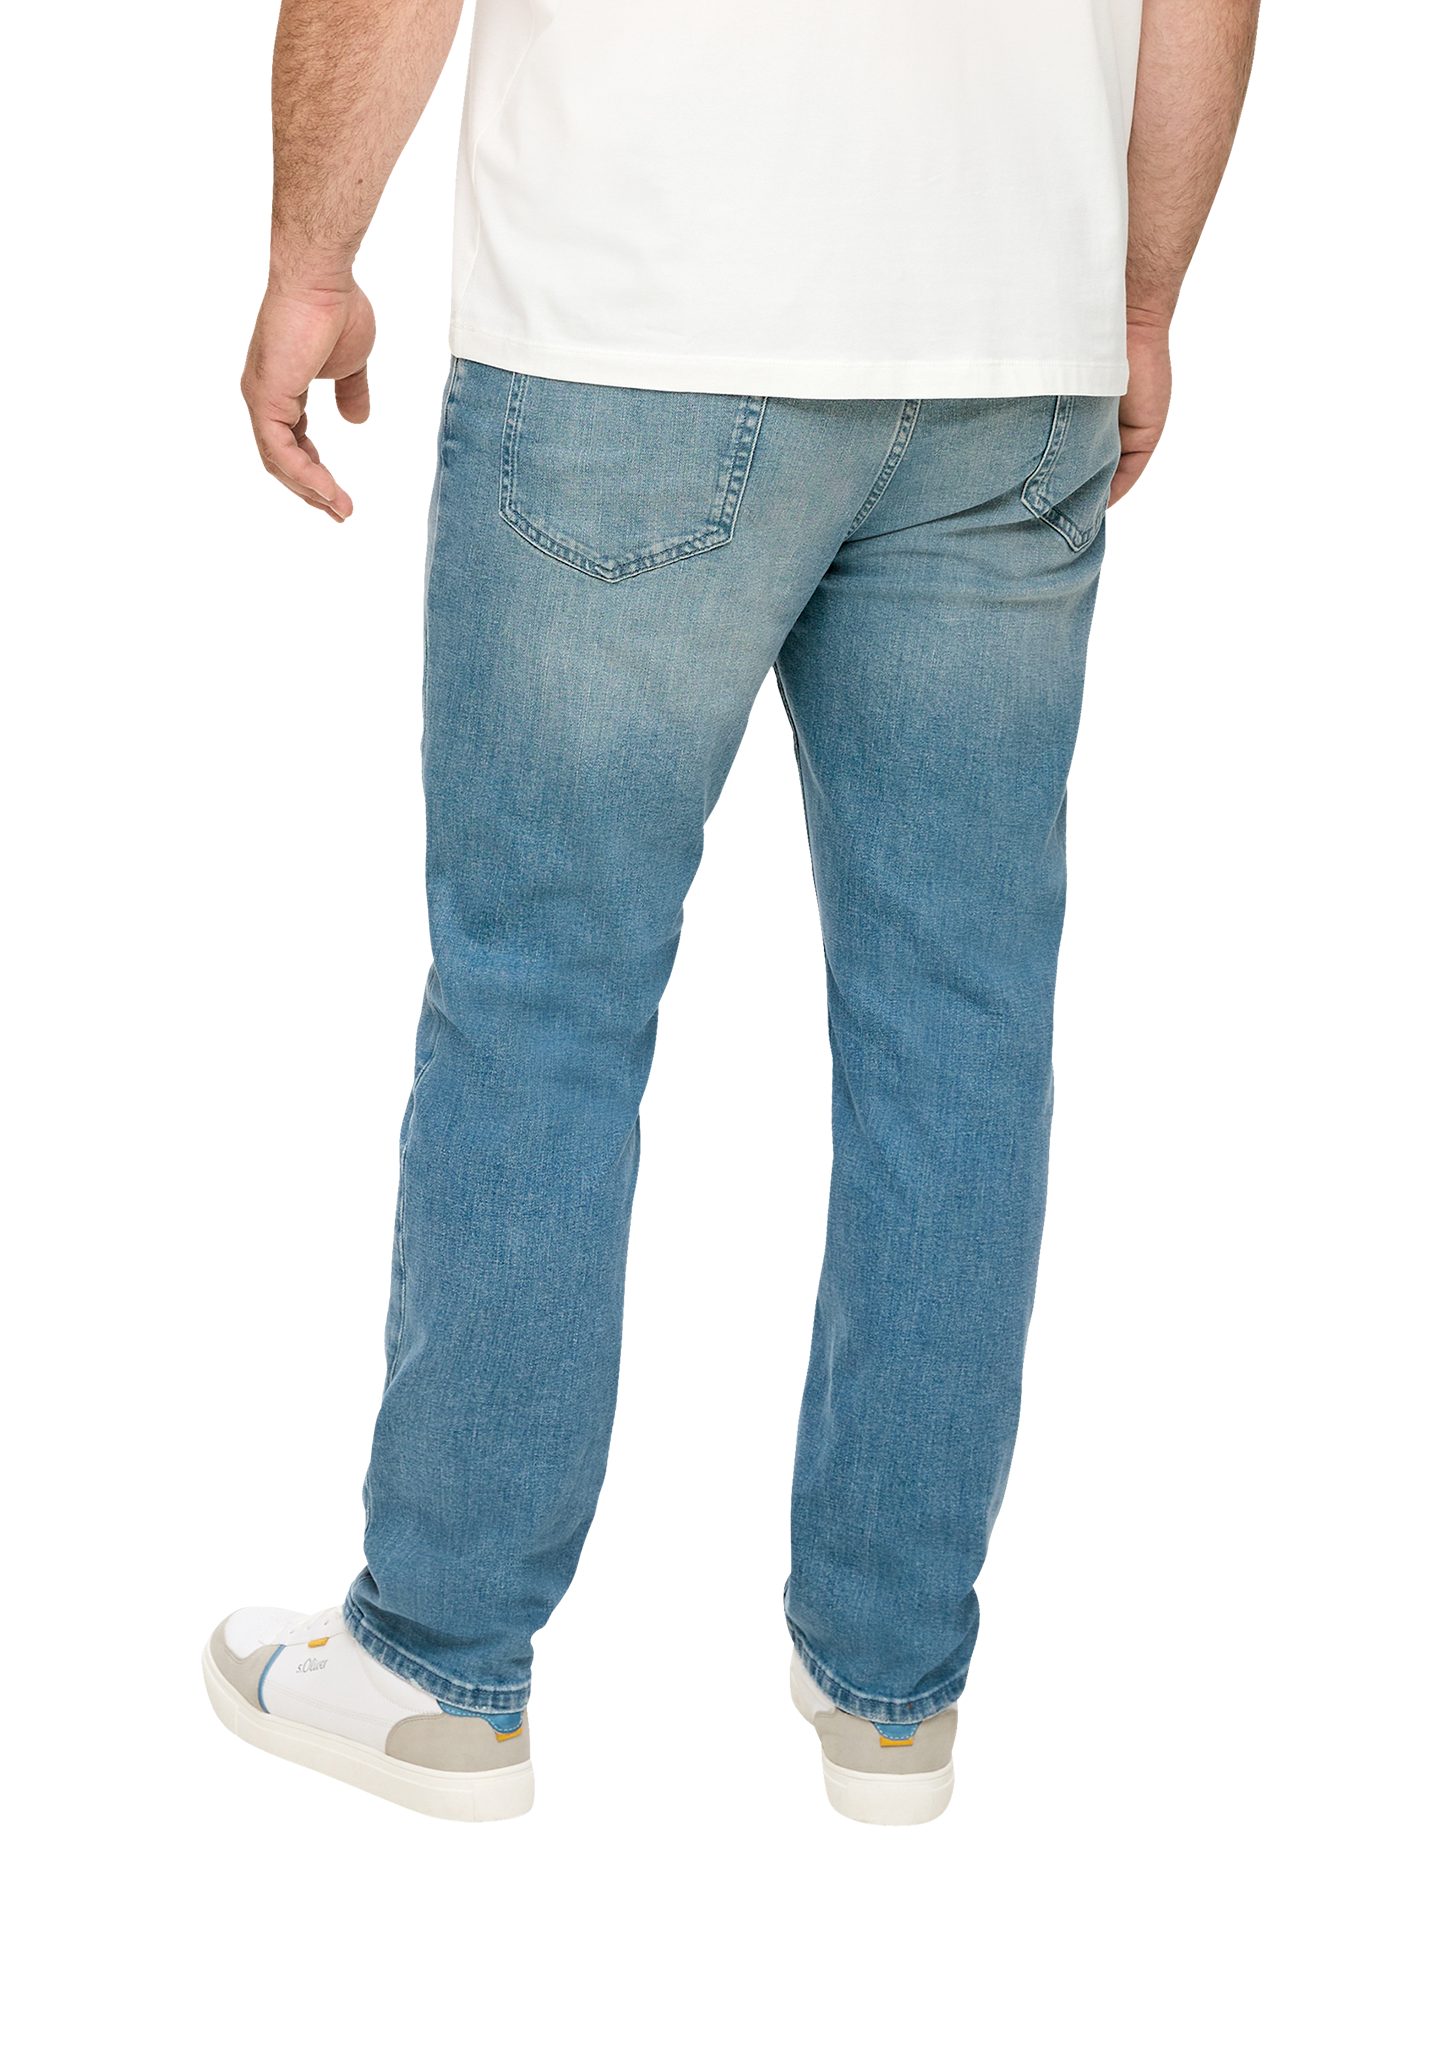 / / Rise Relaxed Stoffhose Jeans Mid s.Oliver Casby Straight Leg Fit /